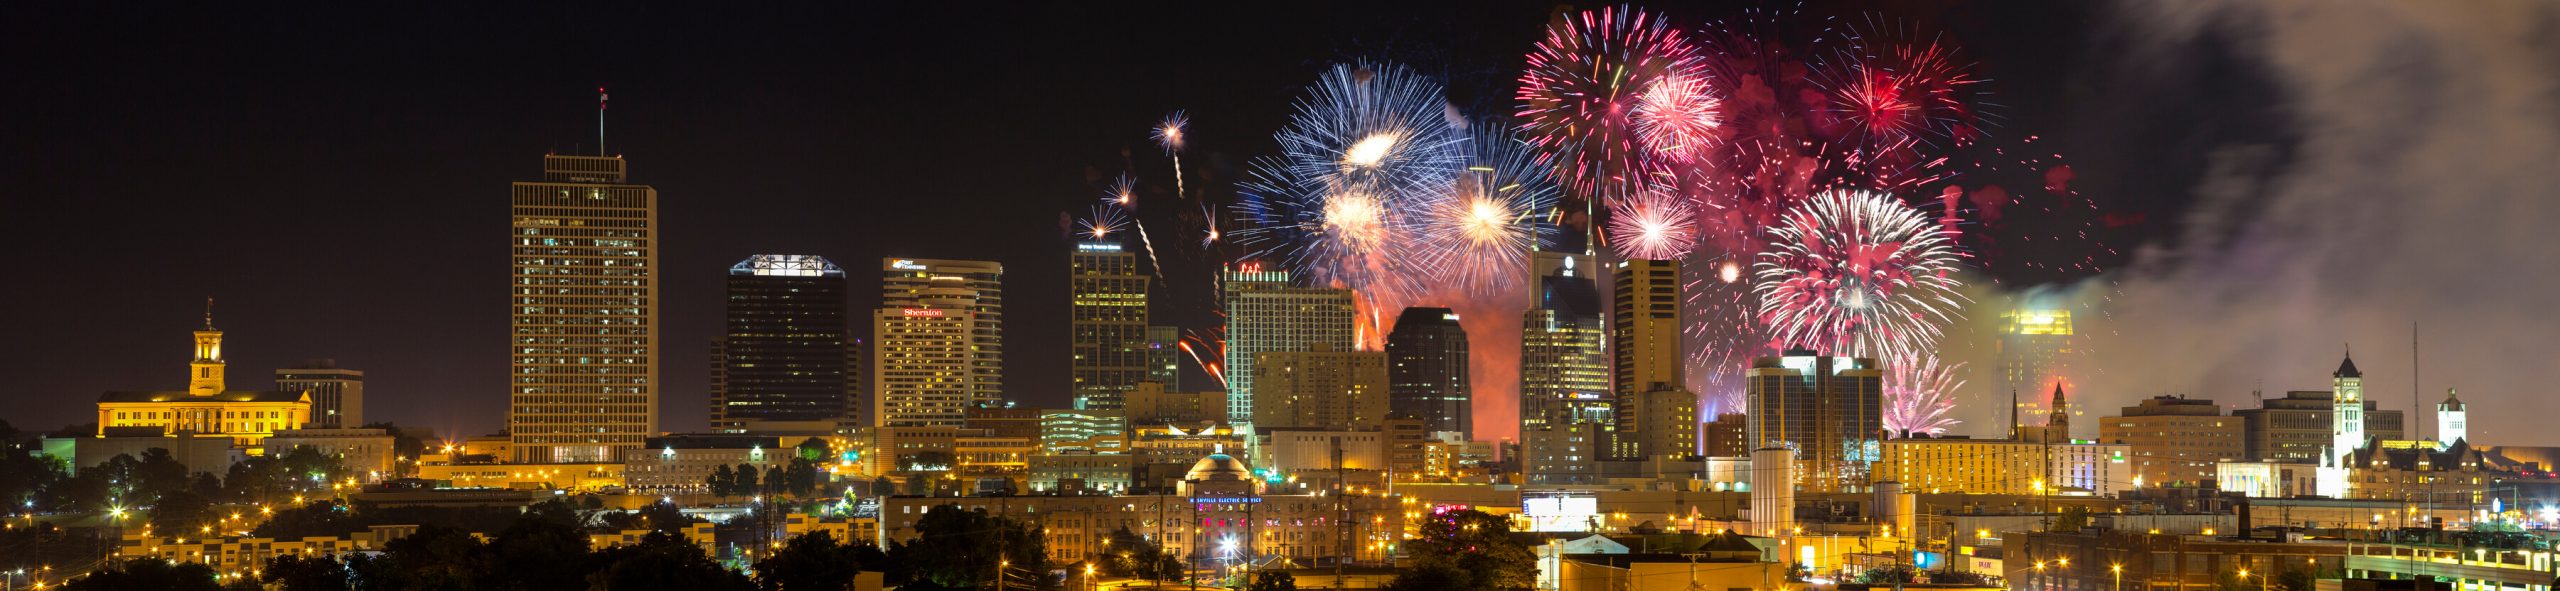 Spend New Year's Eve at the Bicentennial Mall State Park in Nashville - Playlist Properties